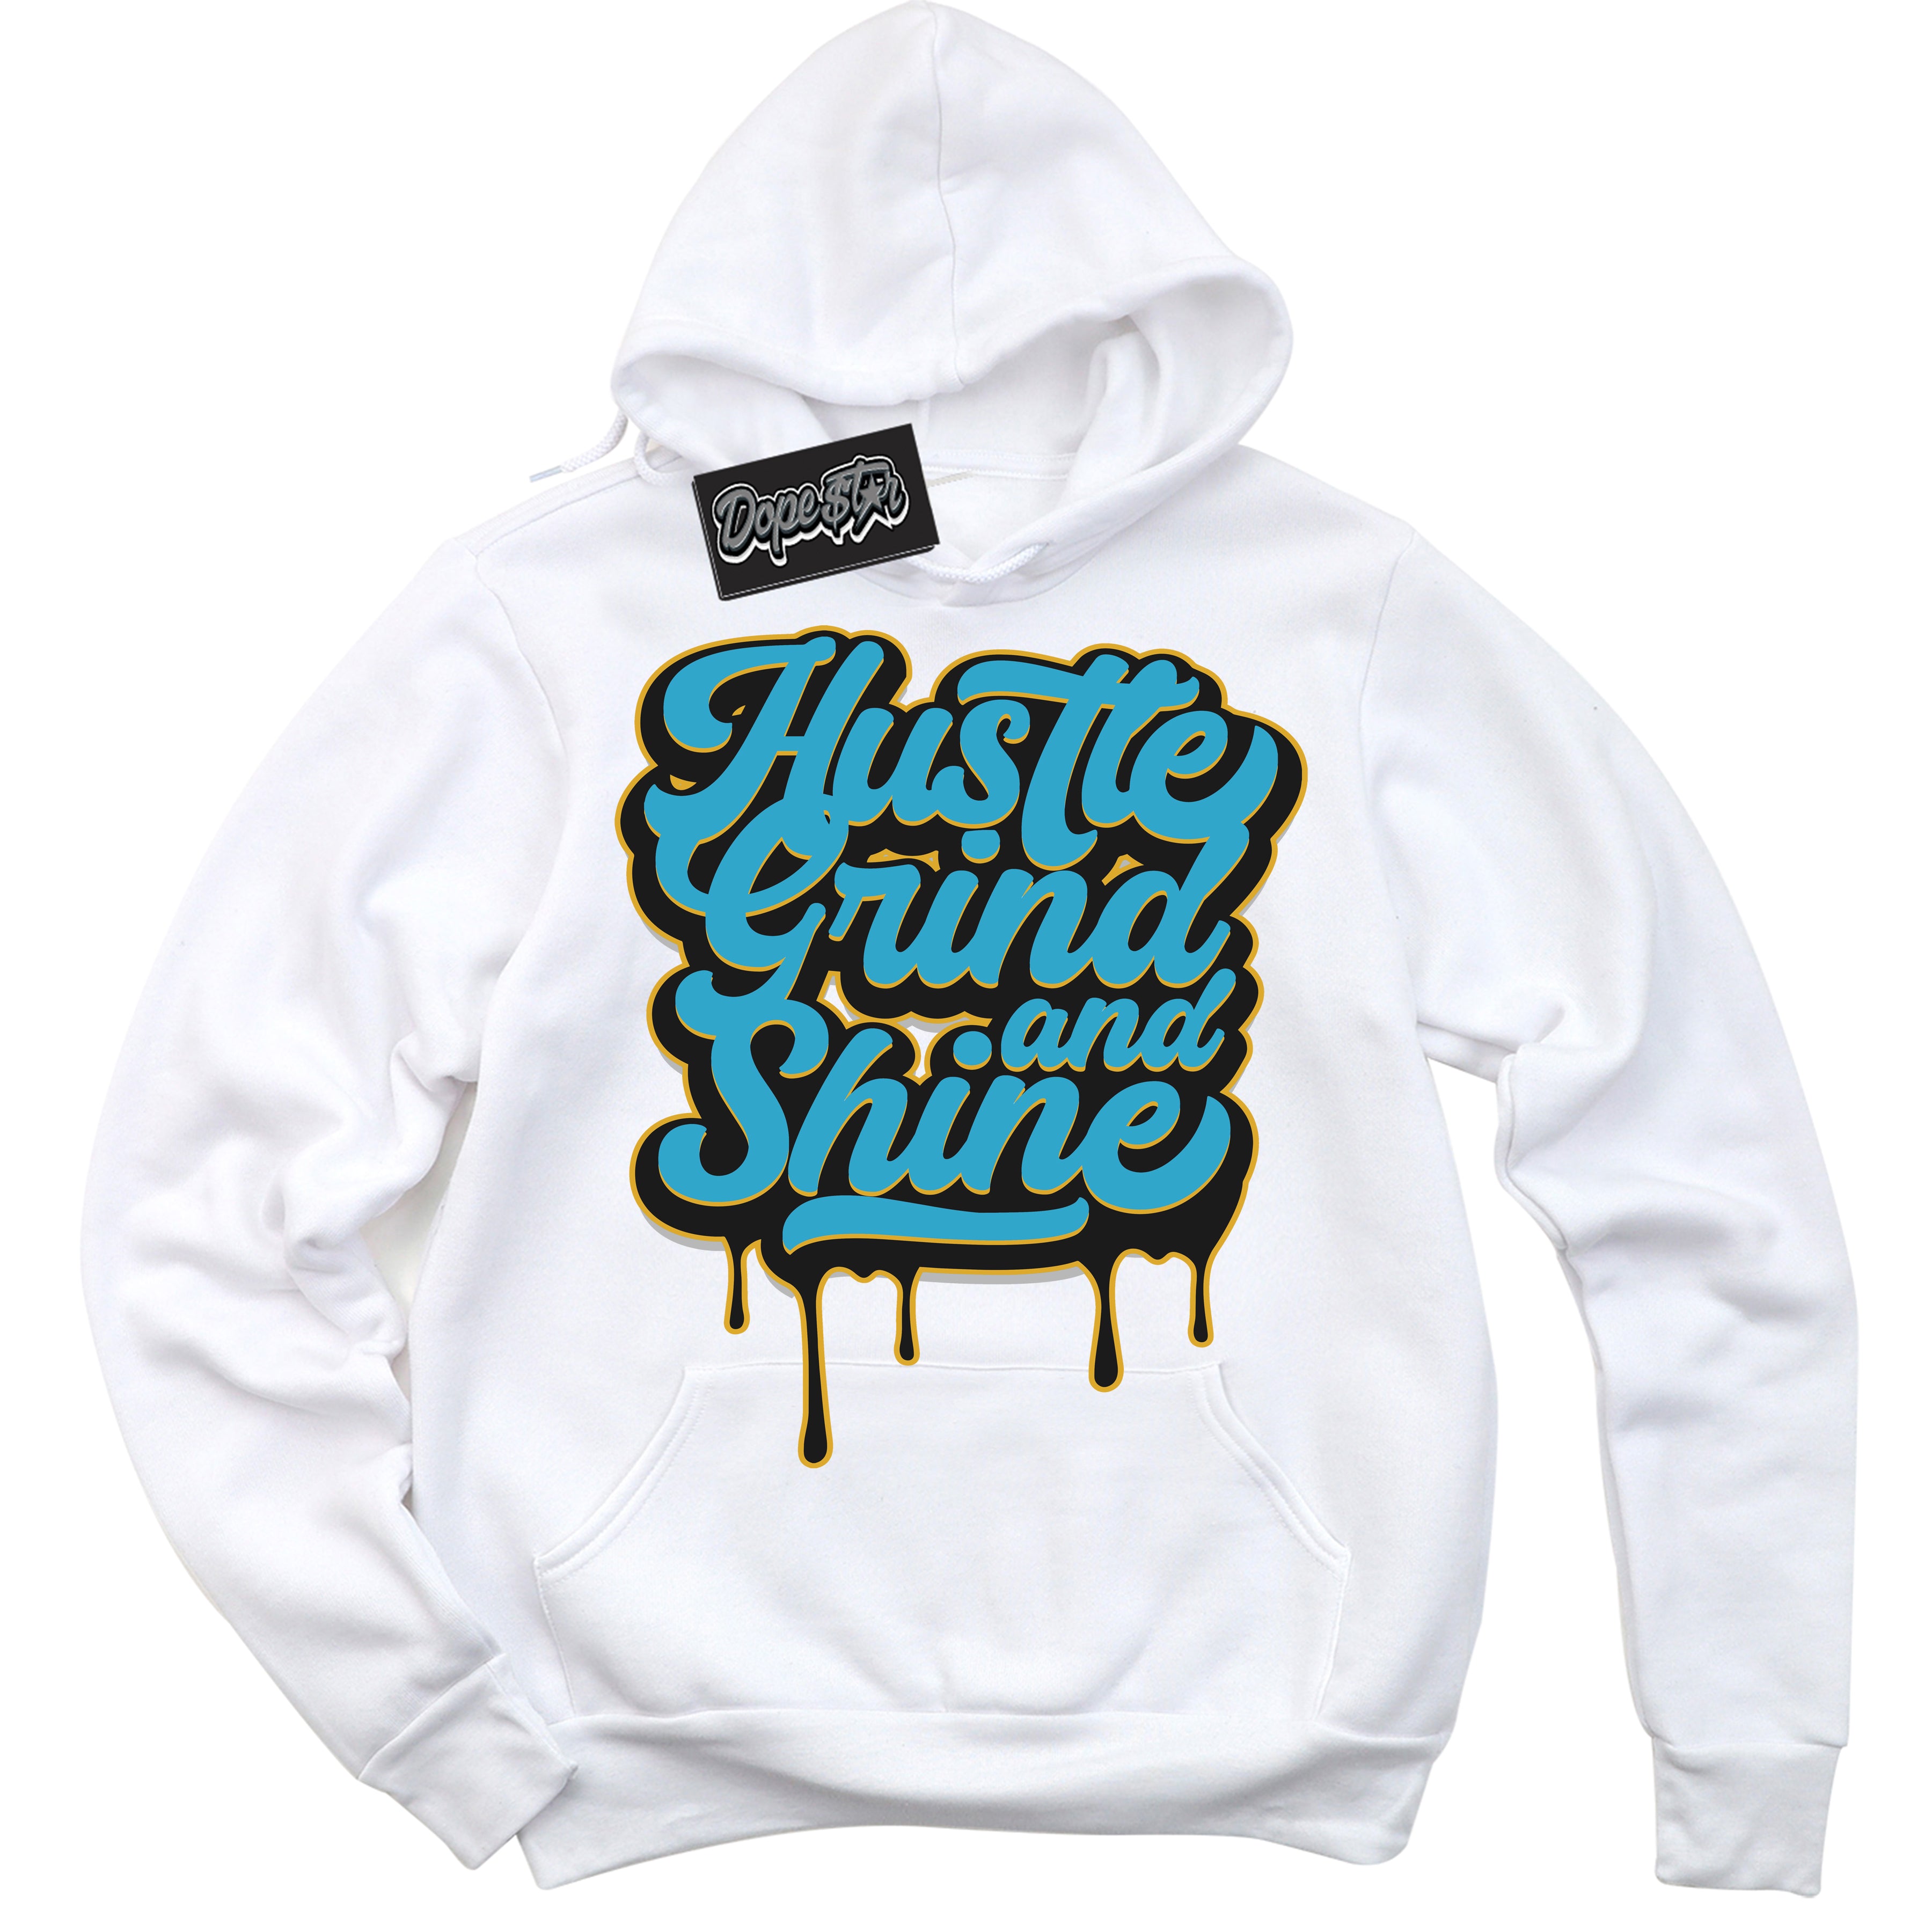 Cool White Hoodie with “ Hustle Grind And Shine ”  design that Perfectly Matches Aqua 5s Sneakers.